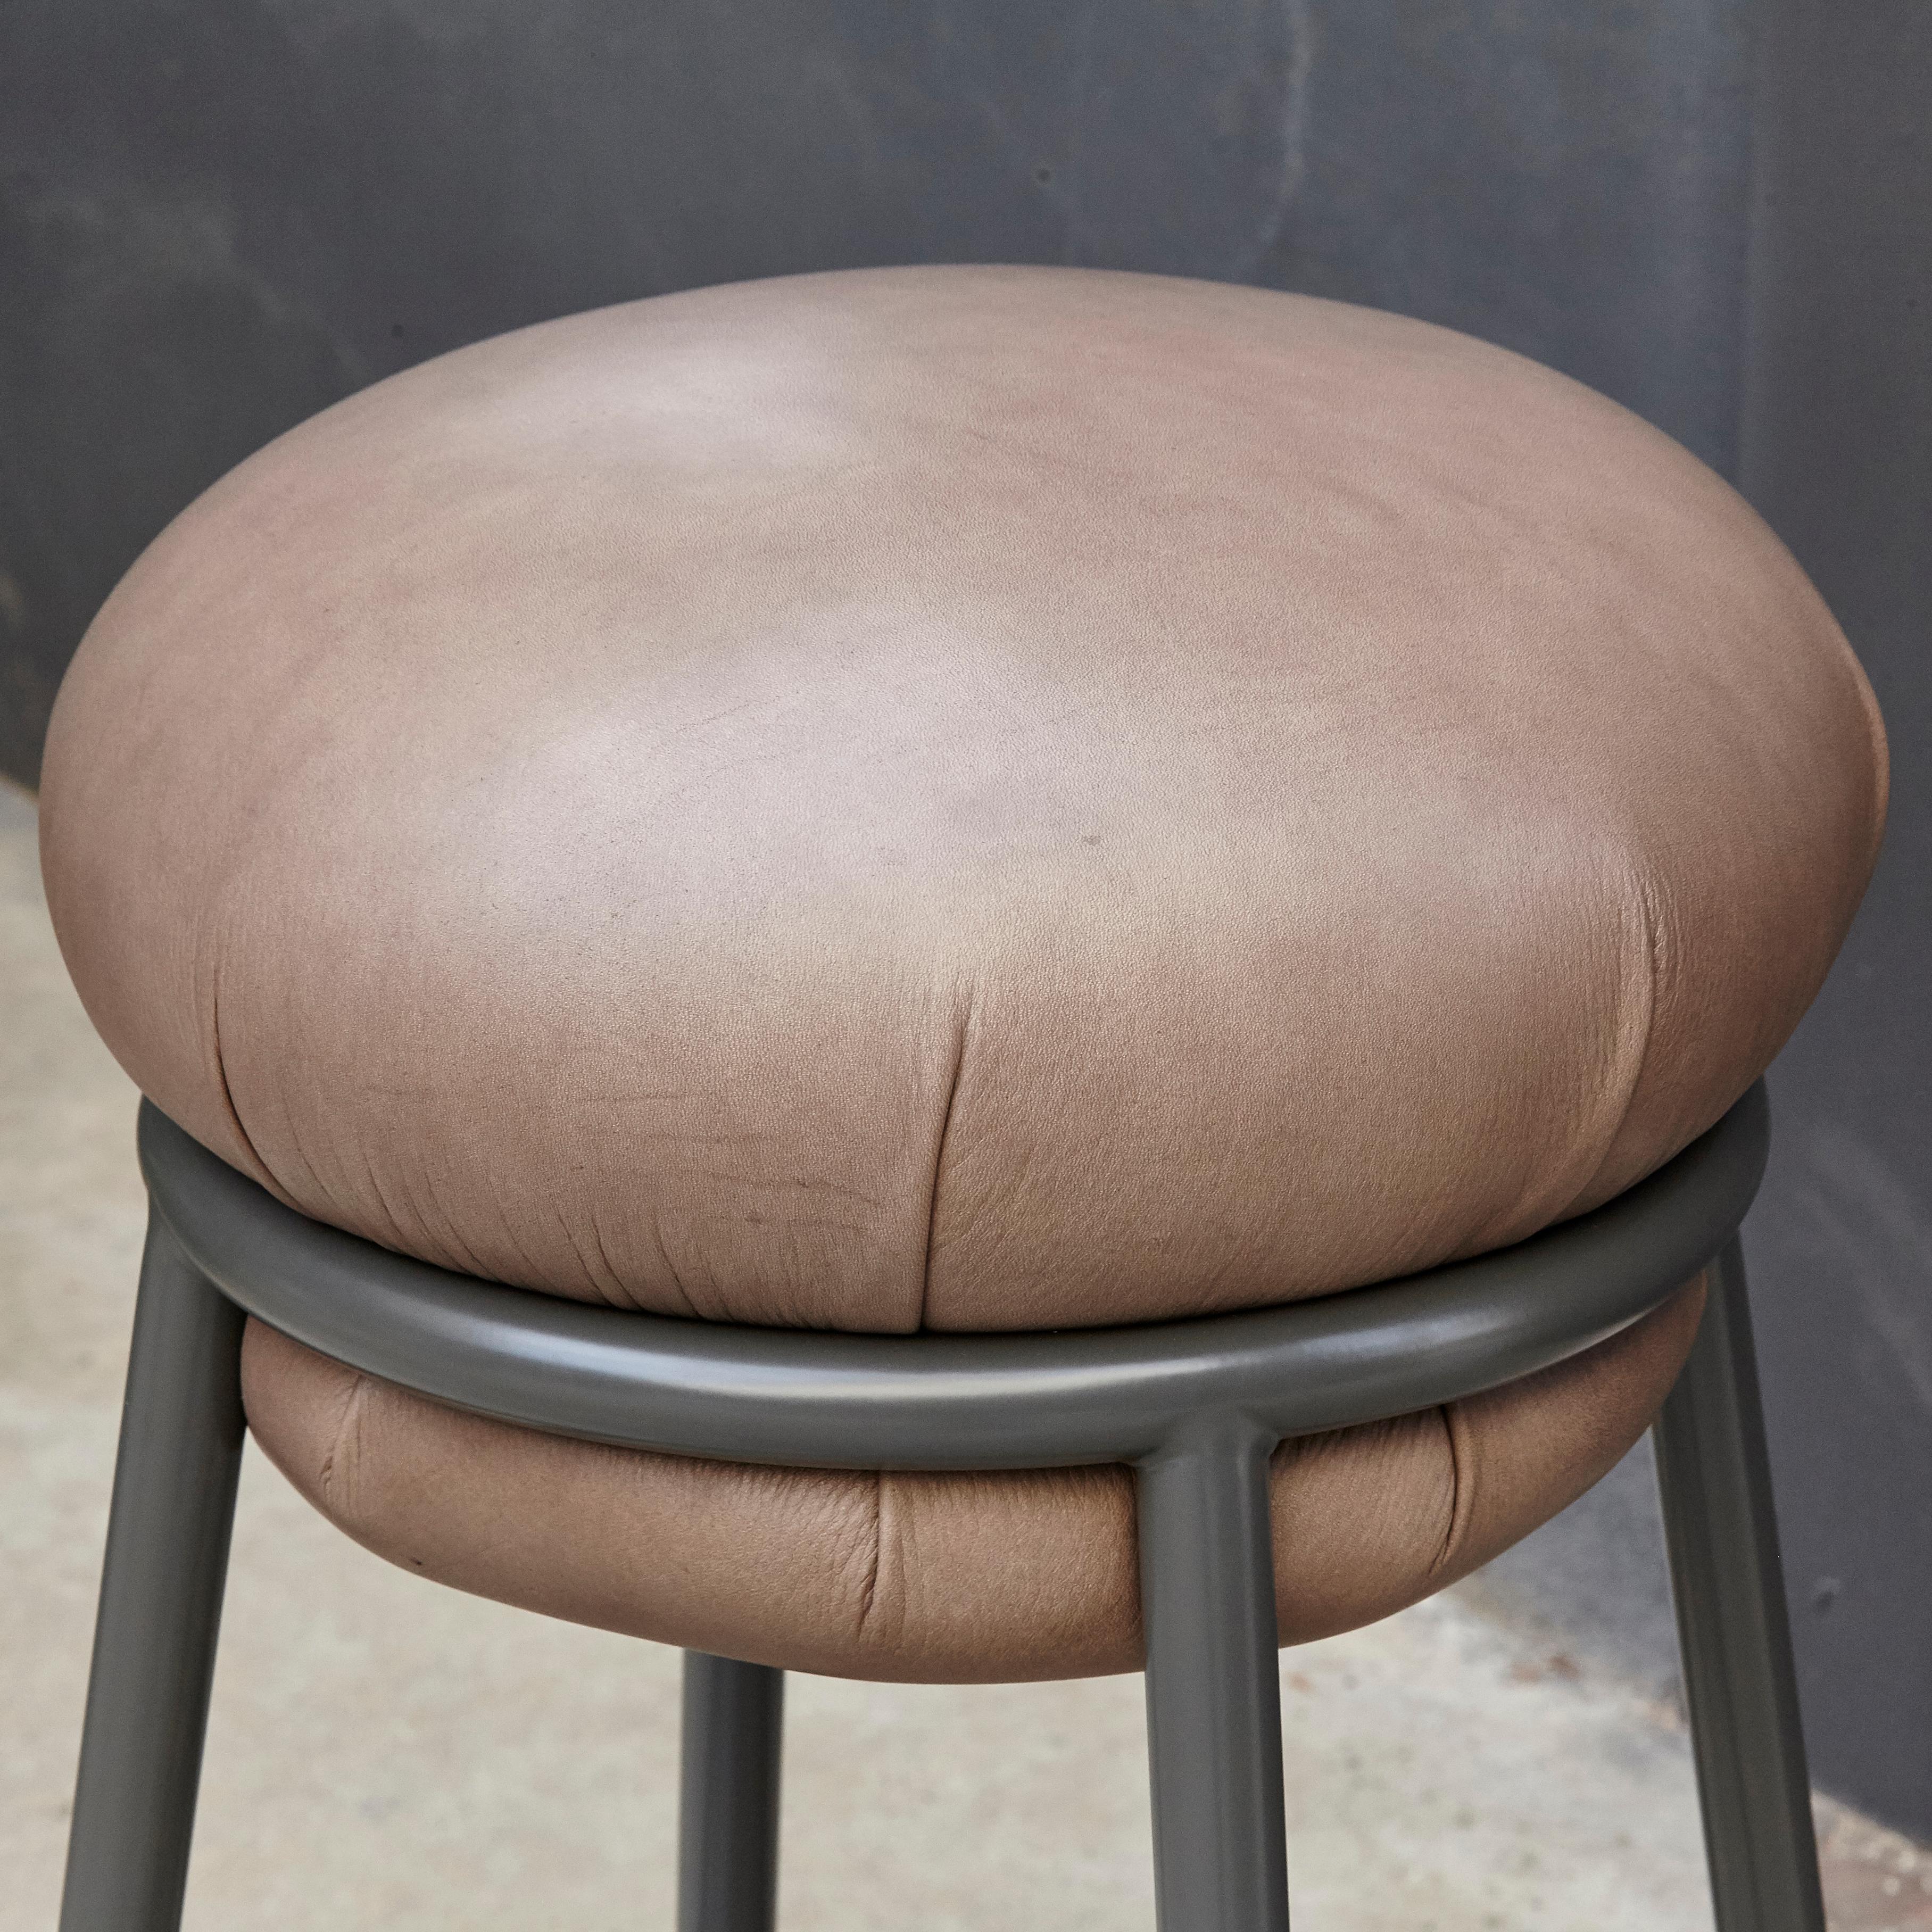 Iron Grasso Contemporary Leather and Lacquered Metal Stool by Stephen Burks in Brown